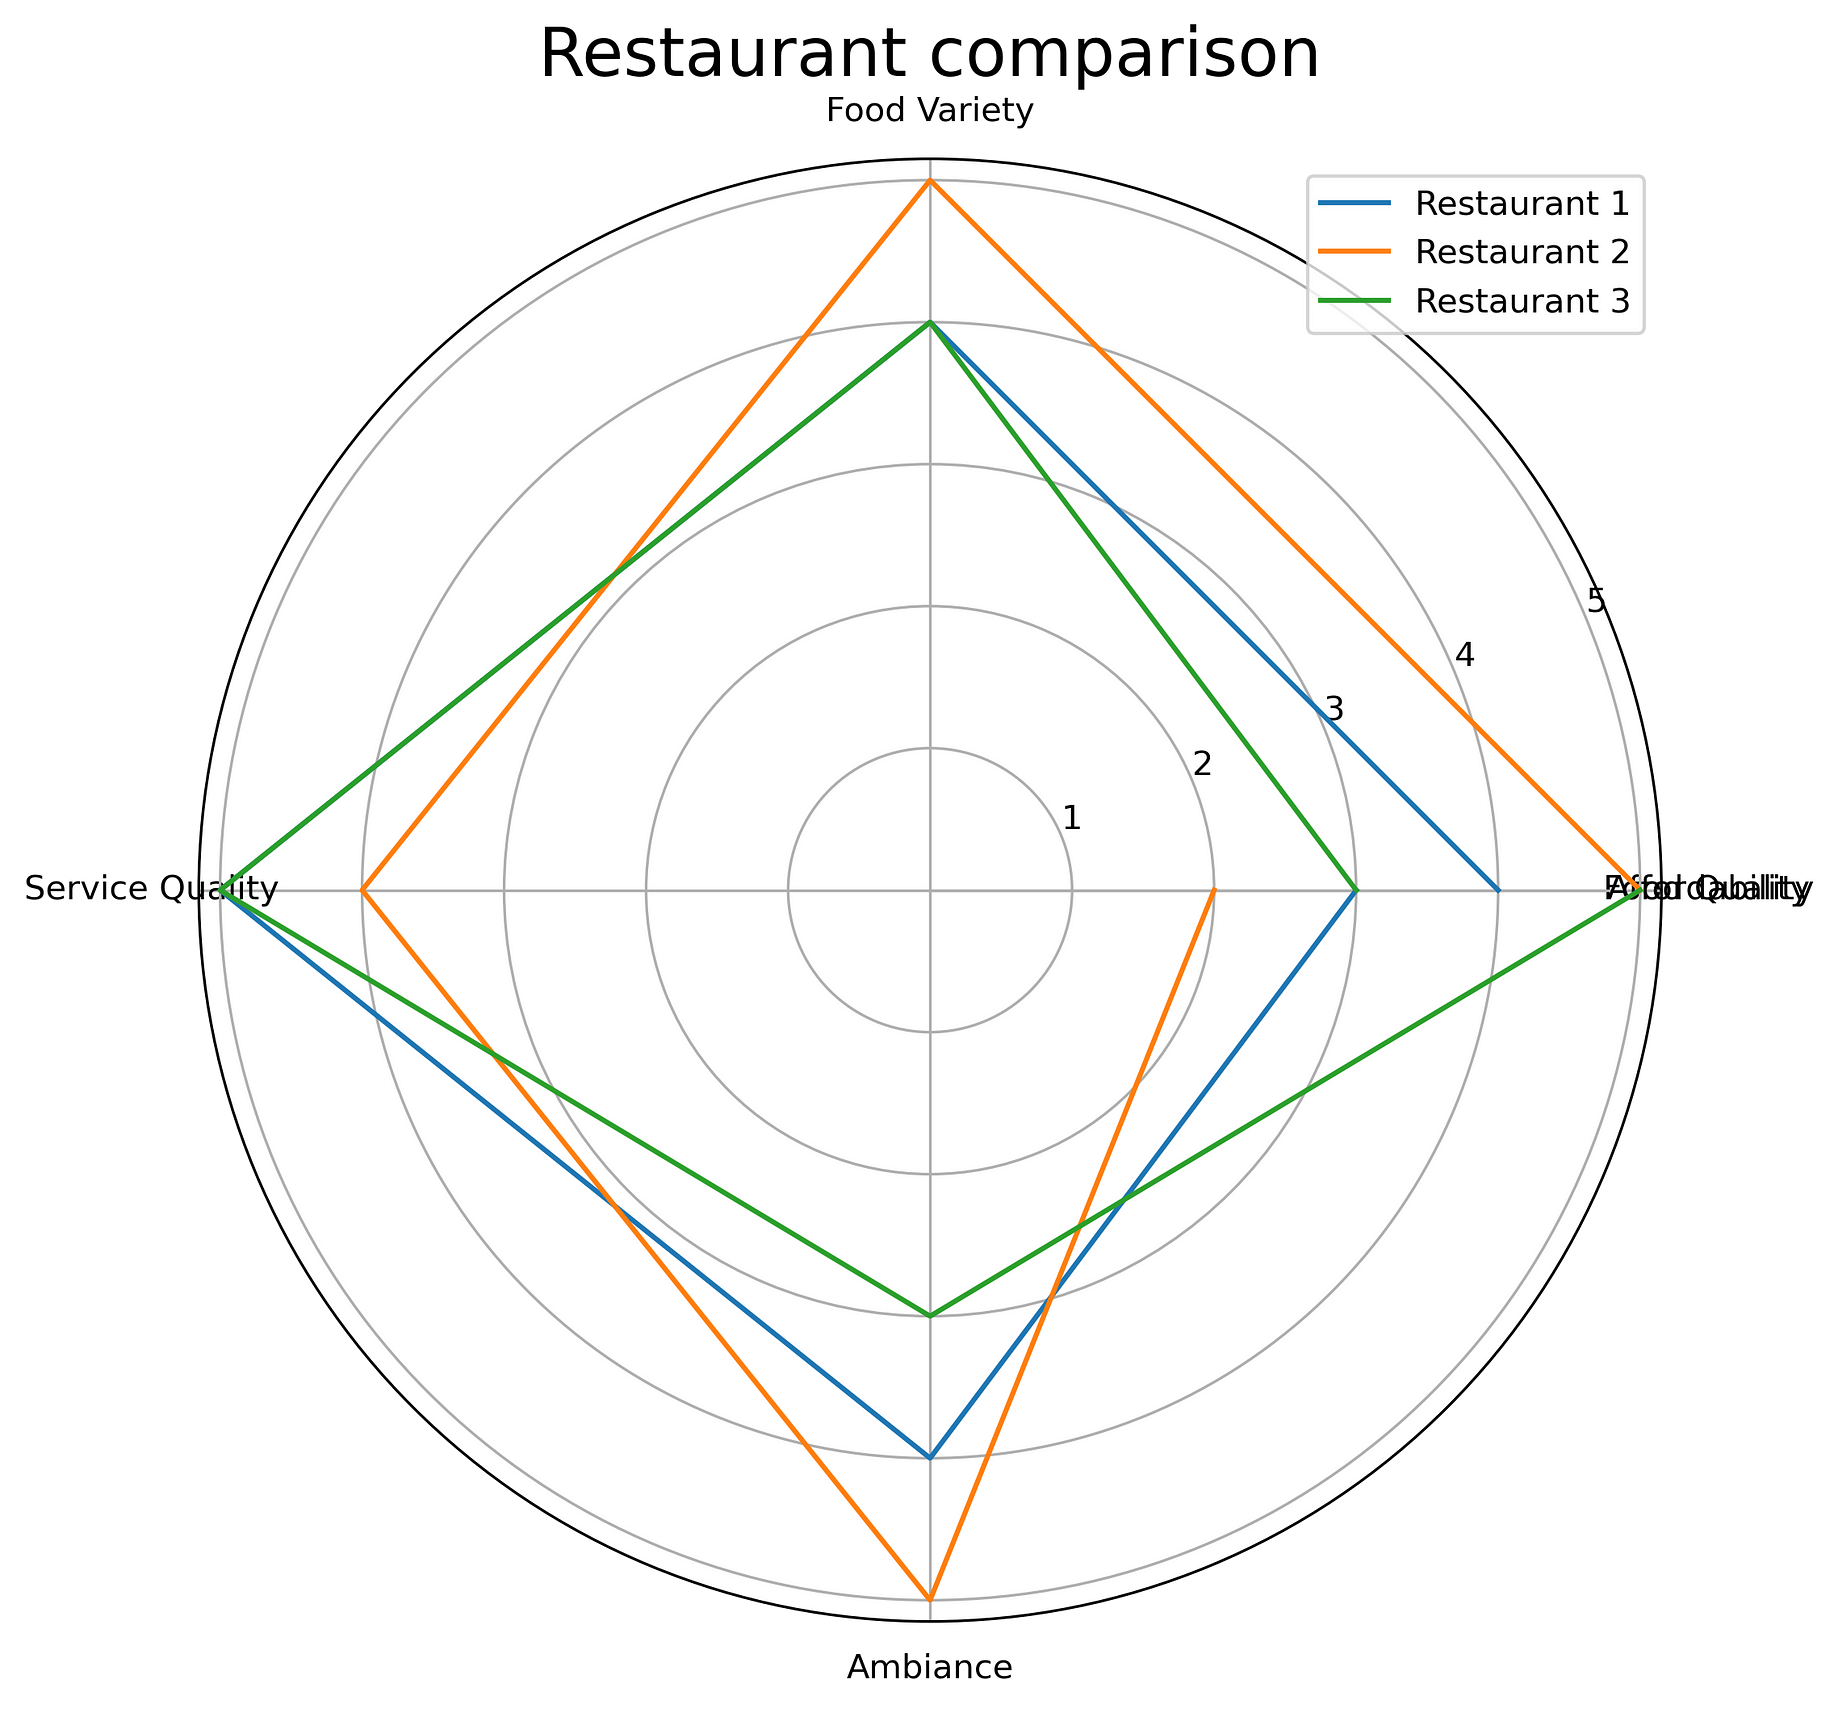 How To Make Stunning Radar Charts With Python Implemented In Matplotlib And Plotly By Dario Radecic Towards Data Science